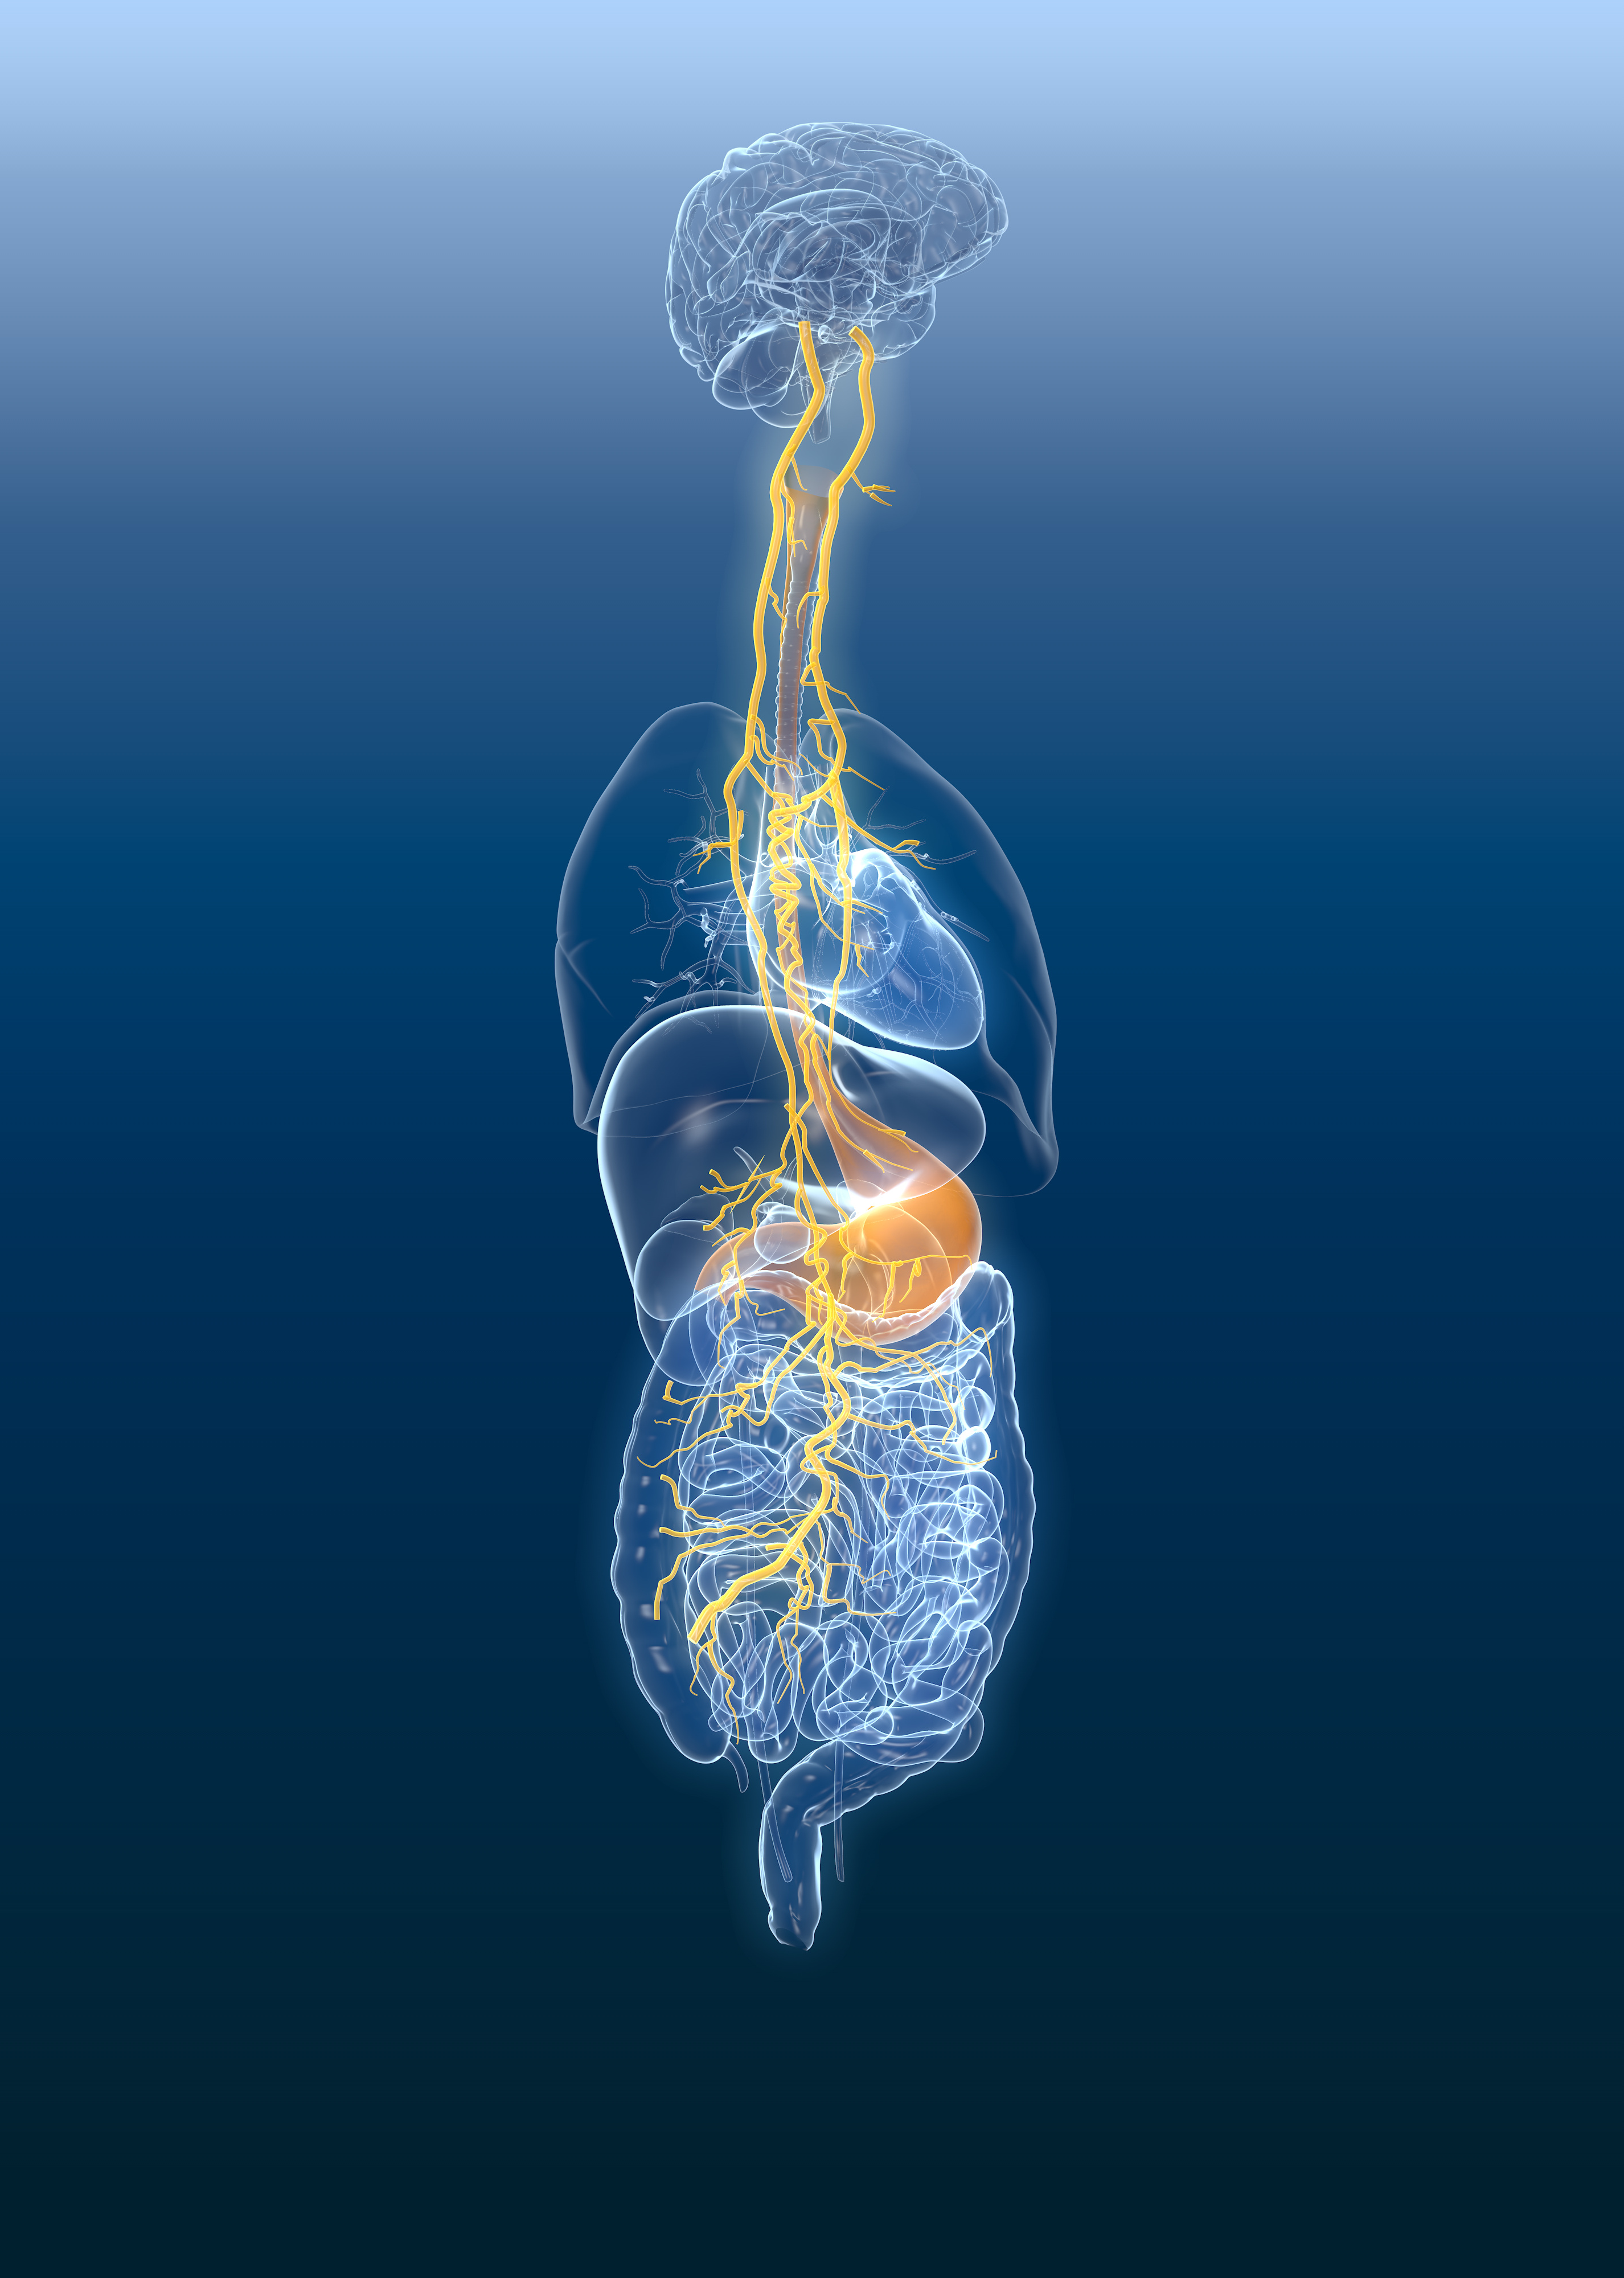 Vagus nerve with painful stomach and digestive system, 3D medically